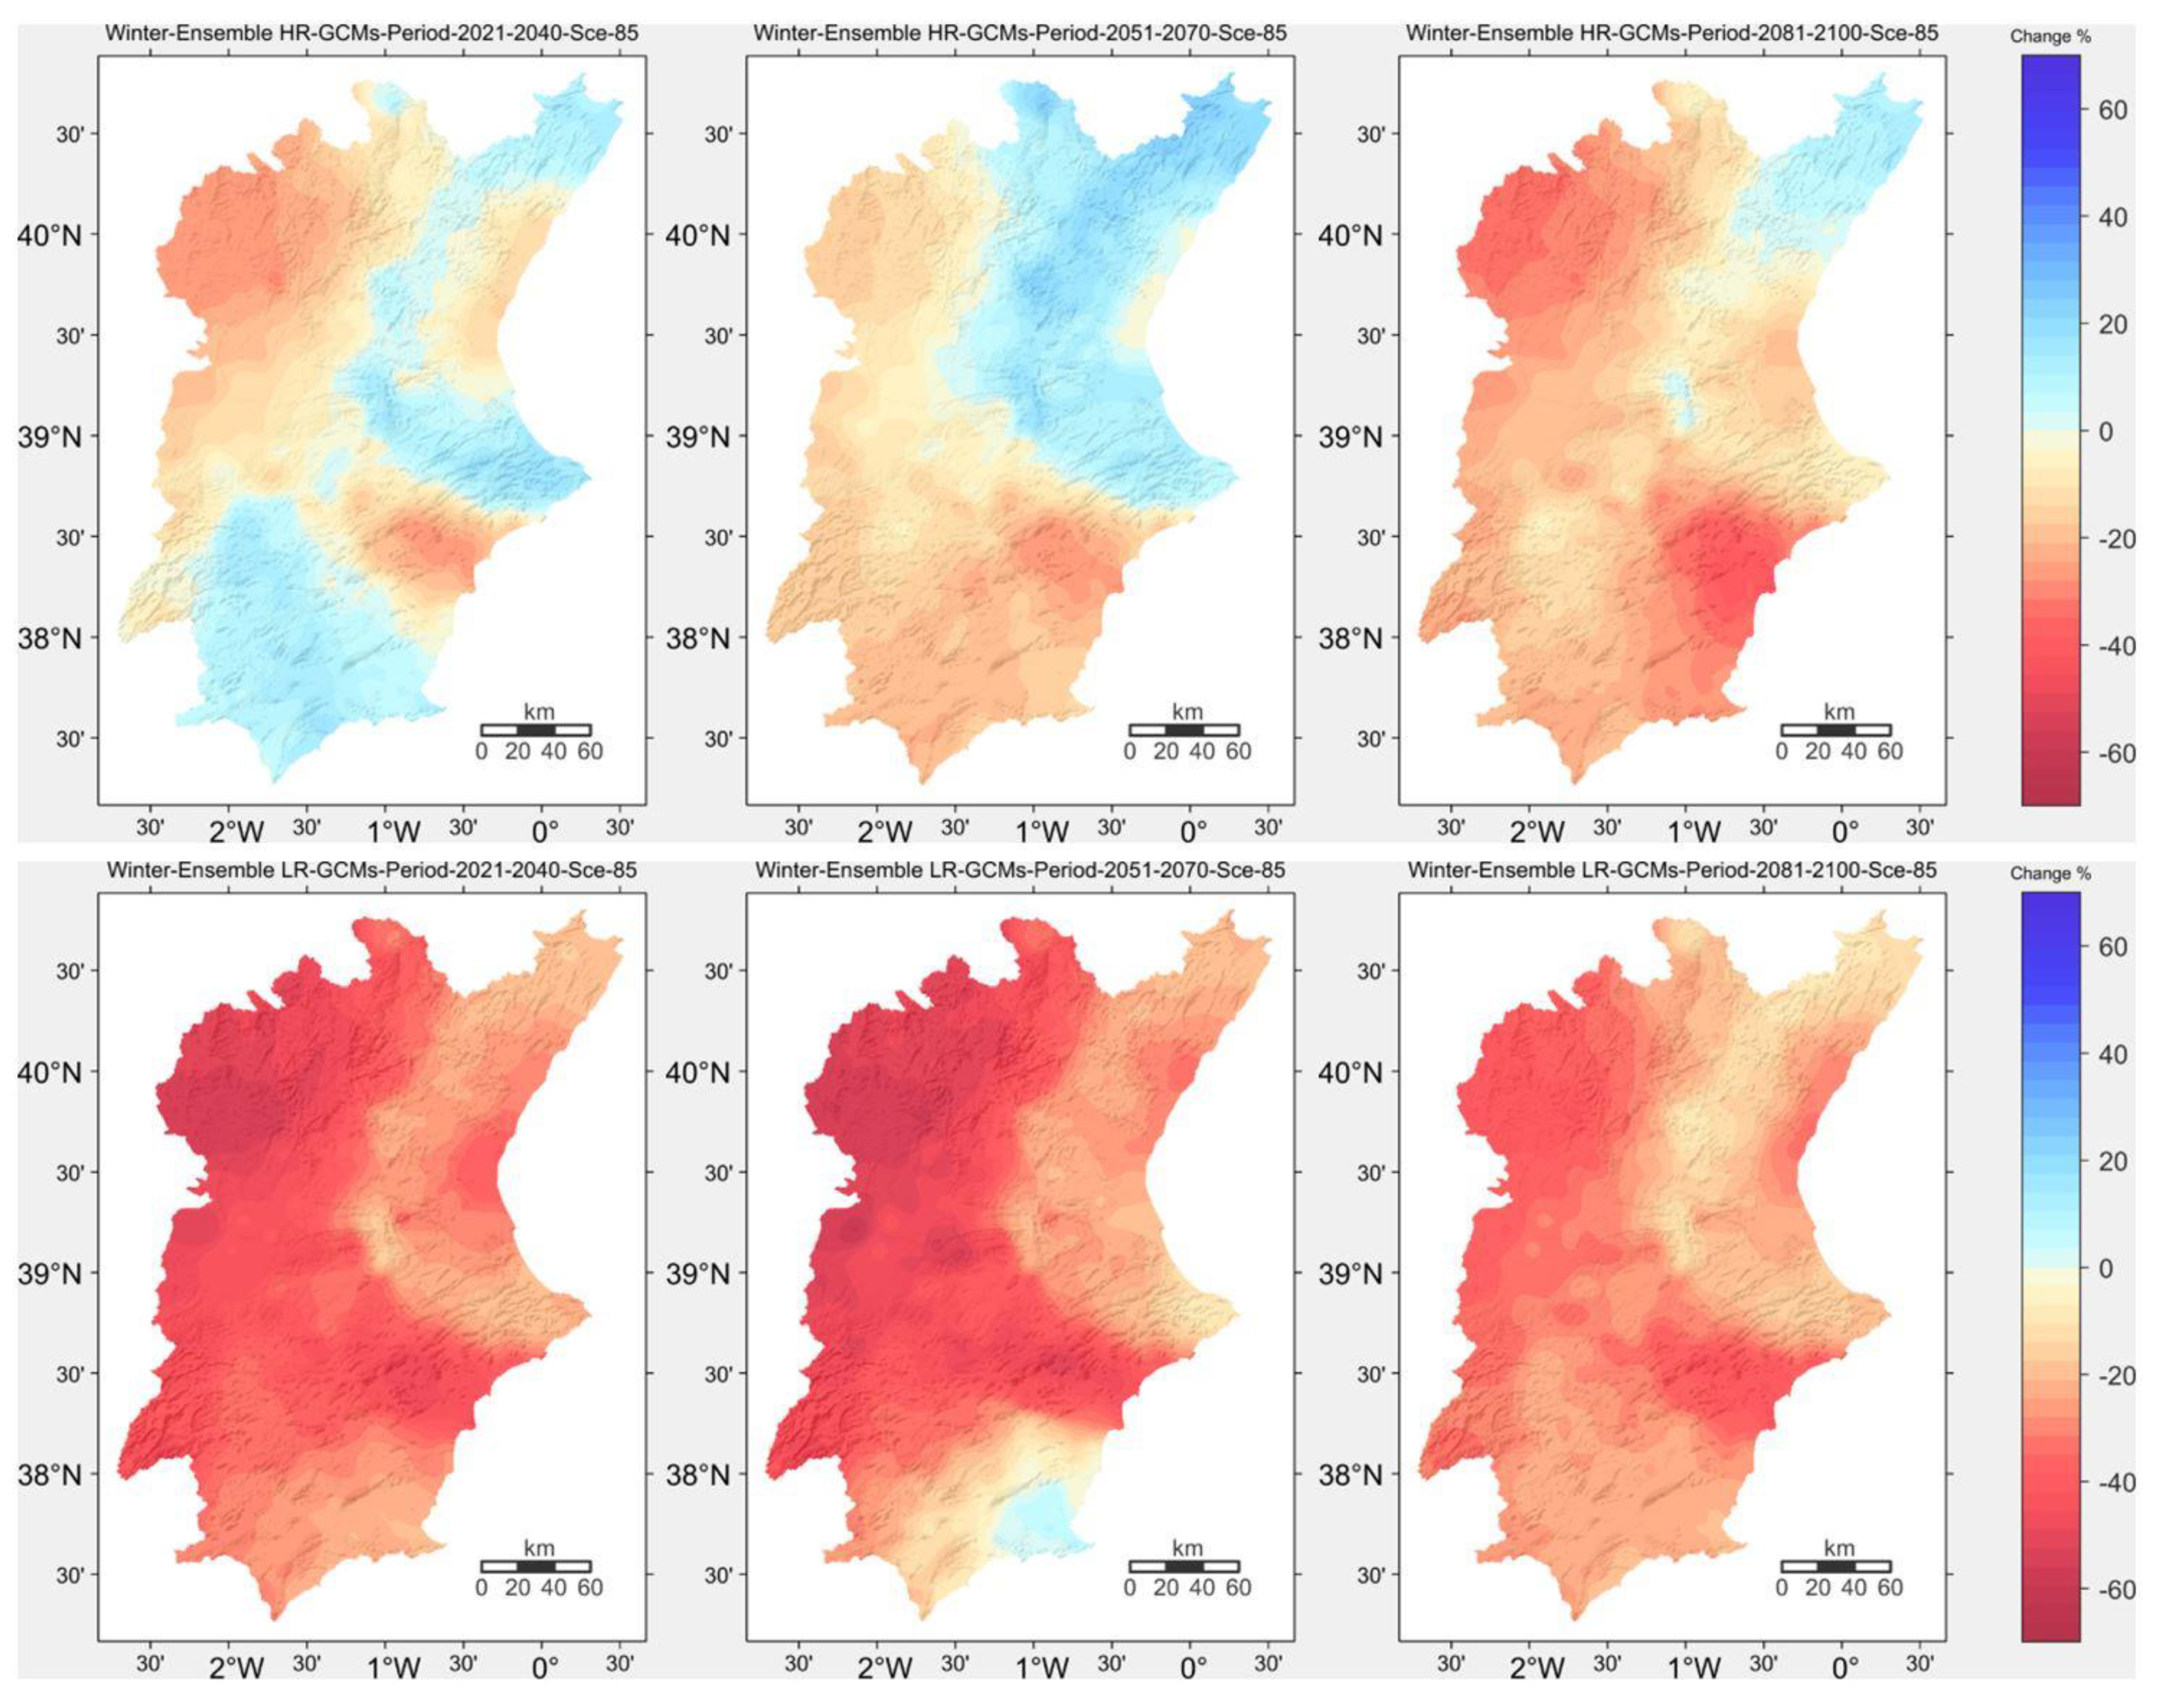 Atmosphere | Free Full-Text | Future Projection of Precipitation Changes in the Júcar and River Basins (Iberian Peninsula) CMIP5 GCMs Local Downscaling